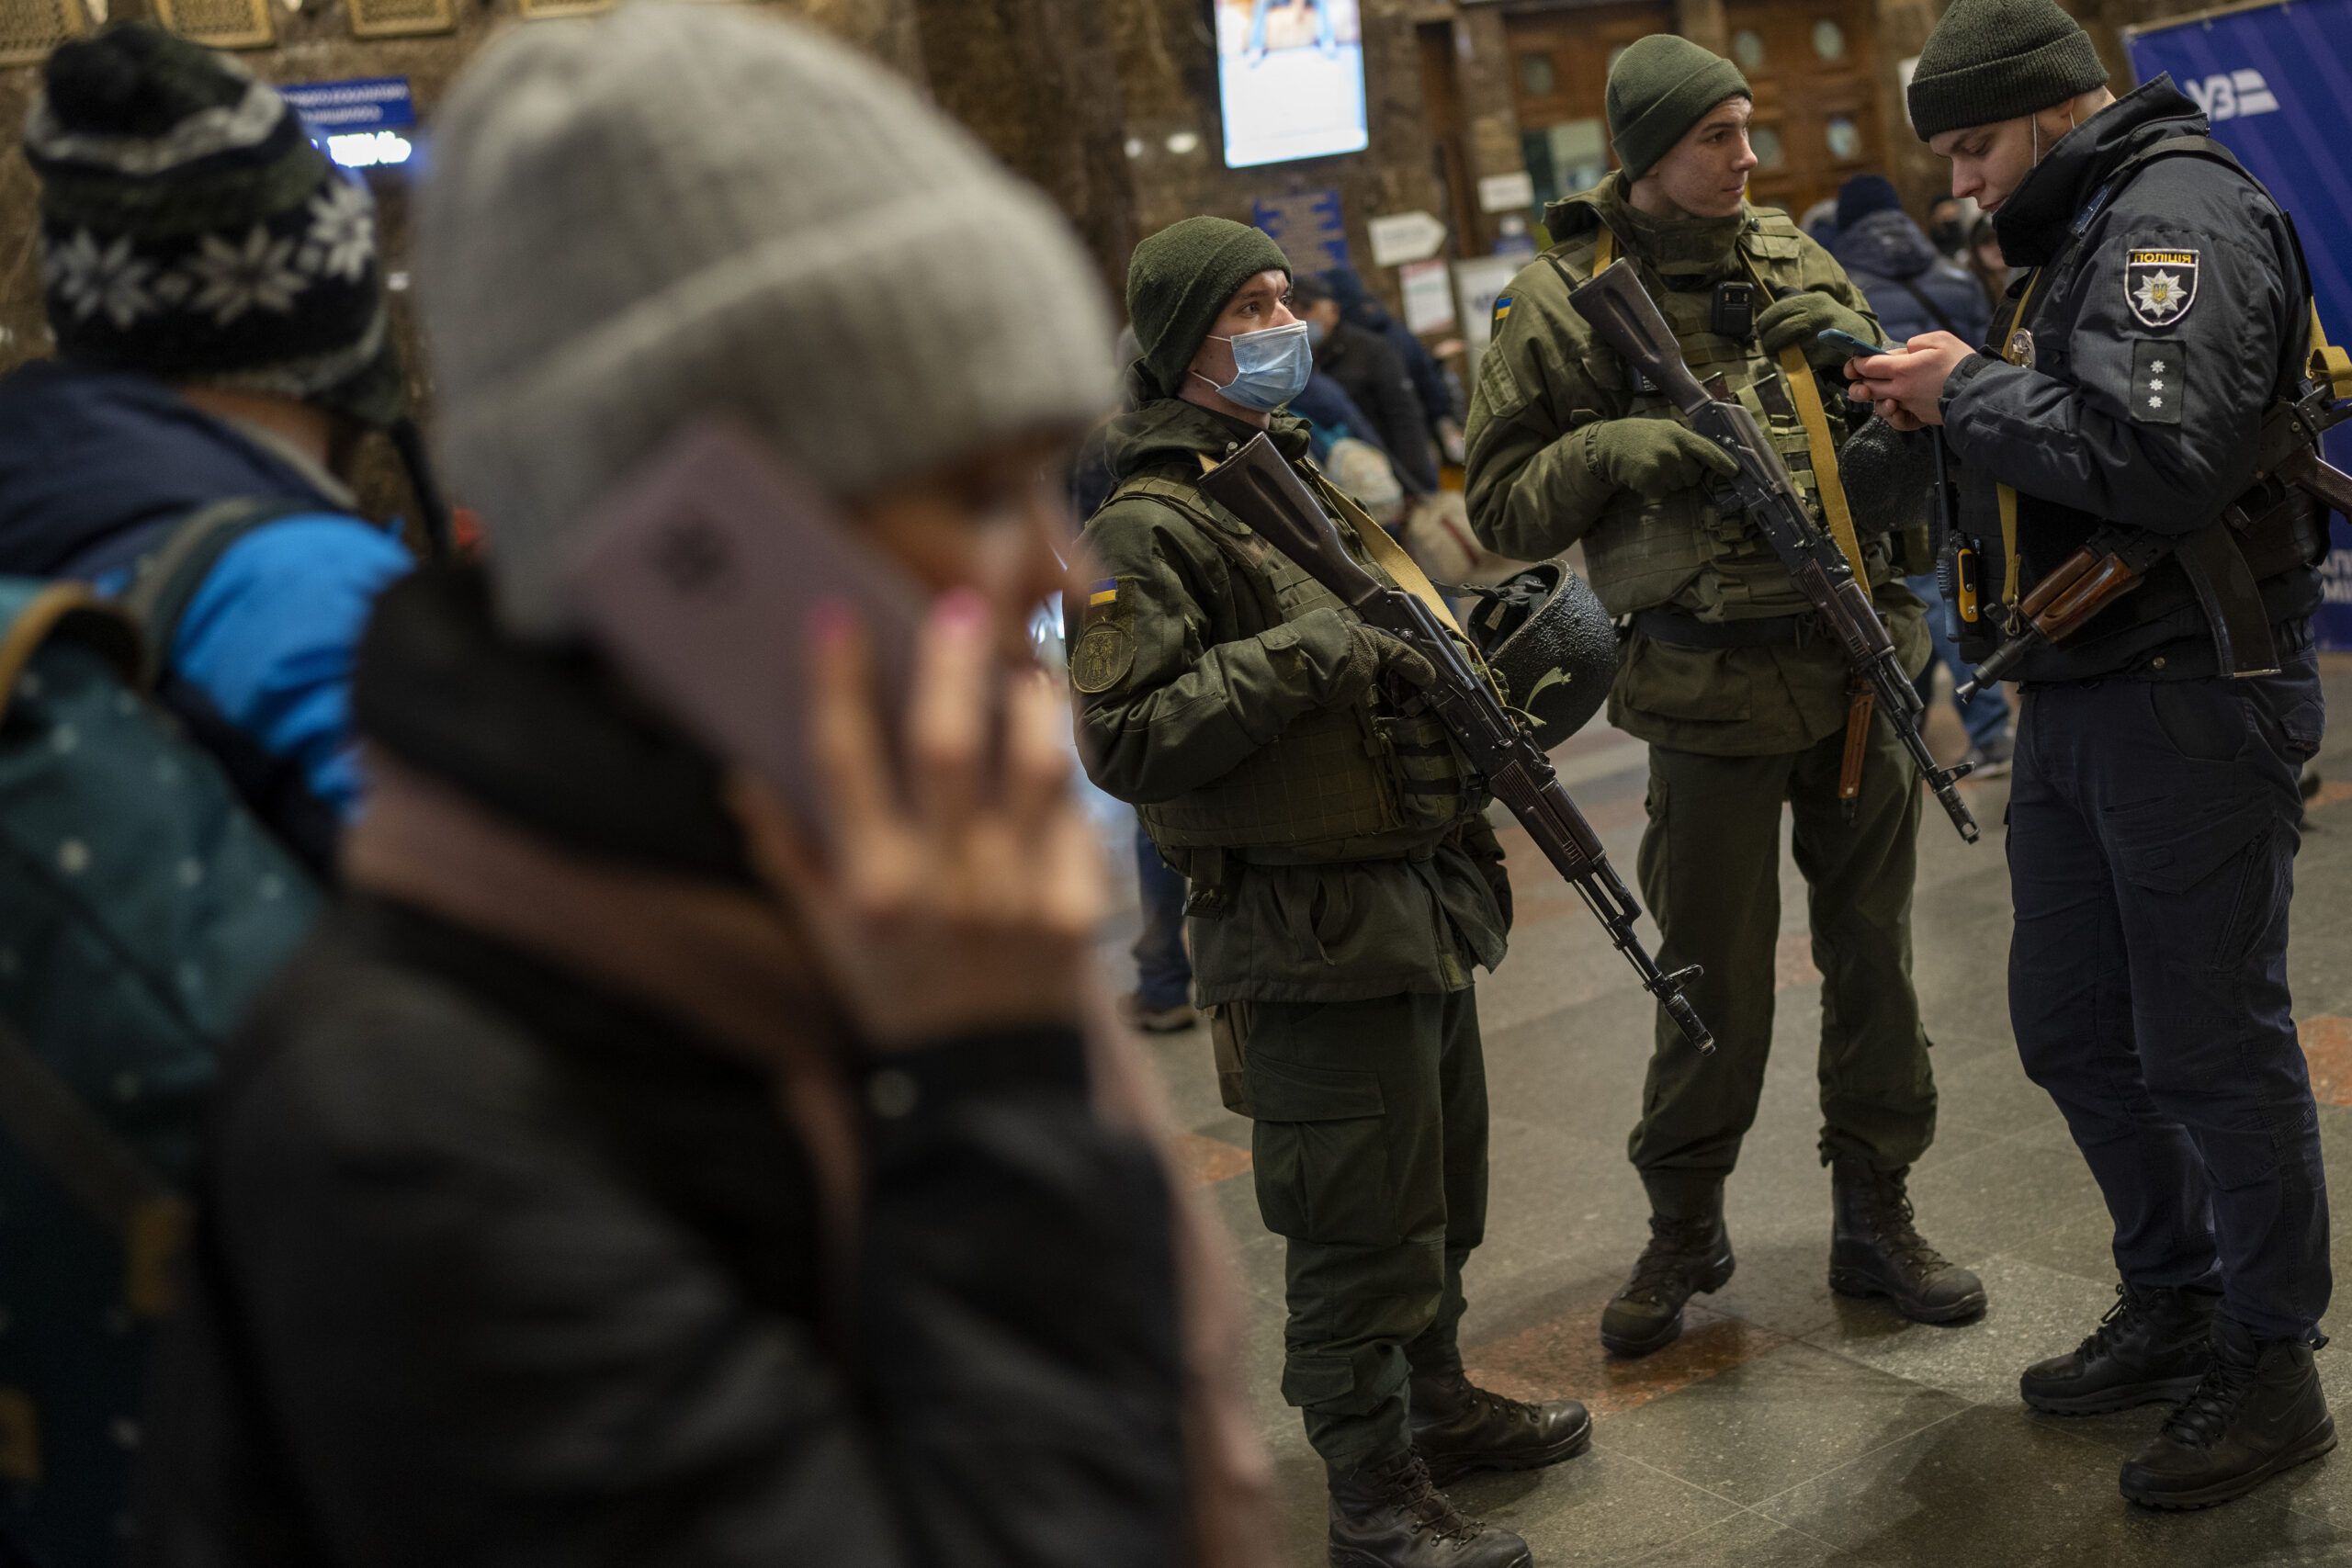 Ukrainian soldiers stand guard as people try to leave at the Kyiv train station